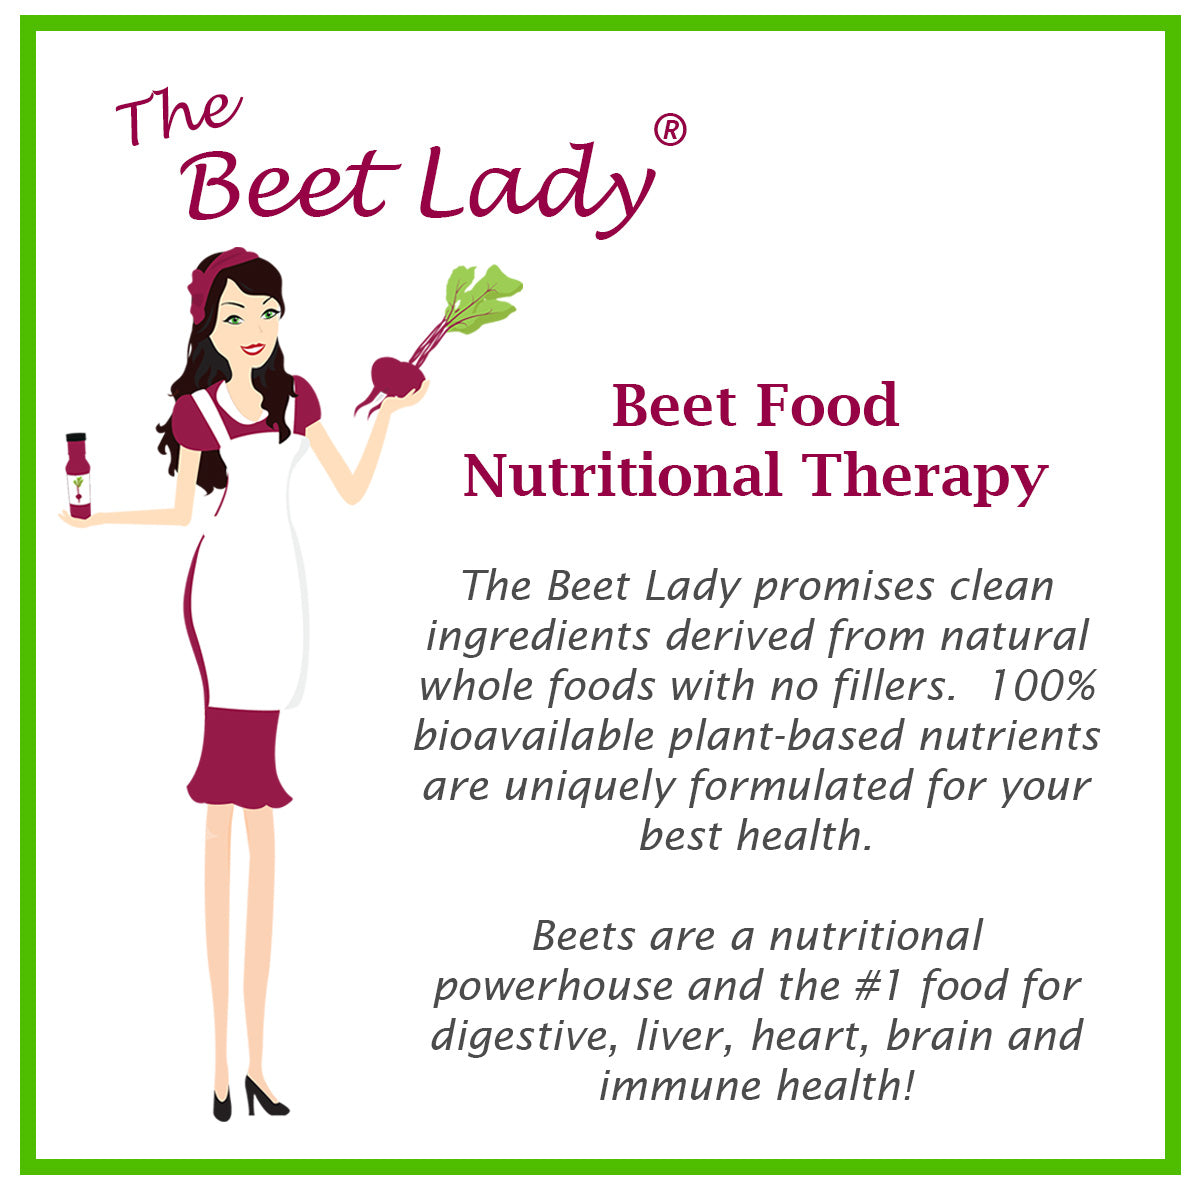 The Beet Lady Beet Food Nutritional Therapy